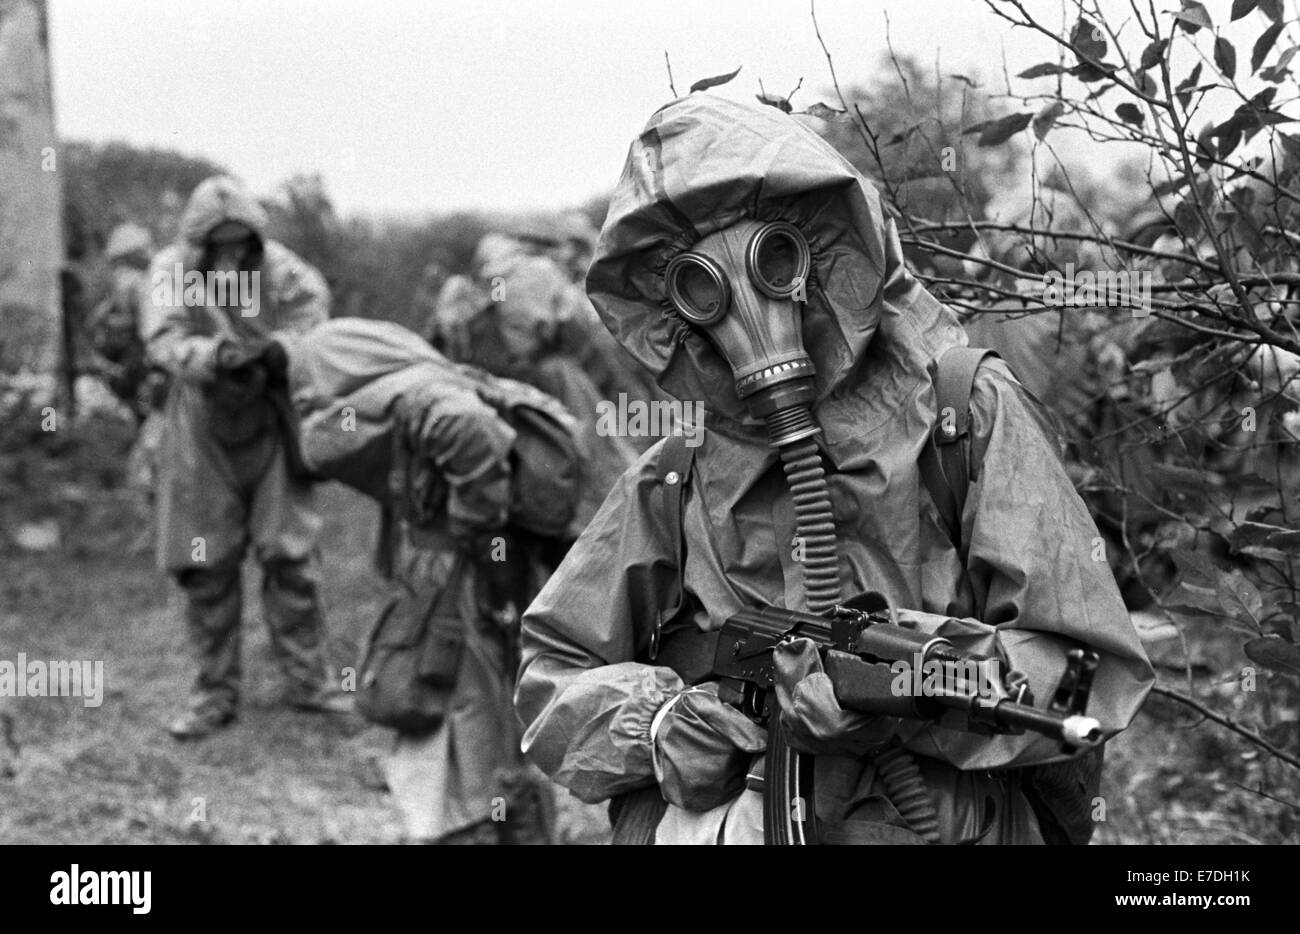 Members of the paramilitary combat troops of a Berlin enterprise wear their  complete protective equipment including gas masks during an exercise near  Berlin, undated from the start of the 1980s. The members